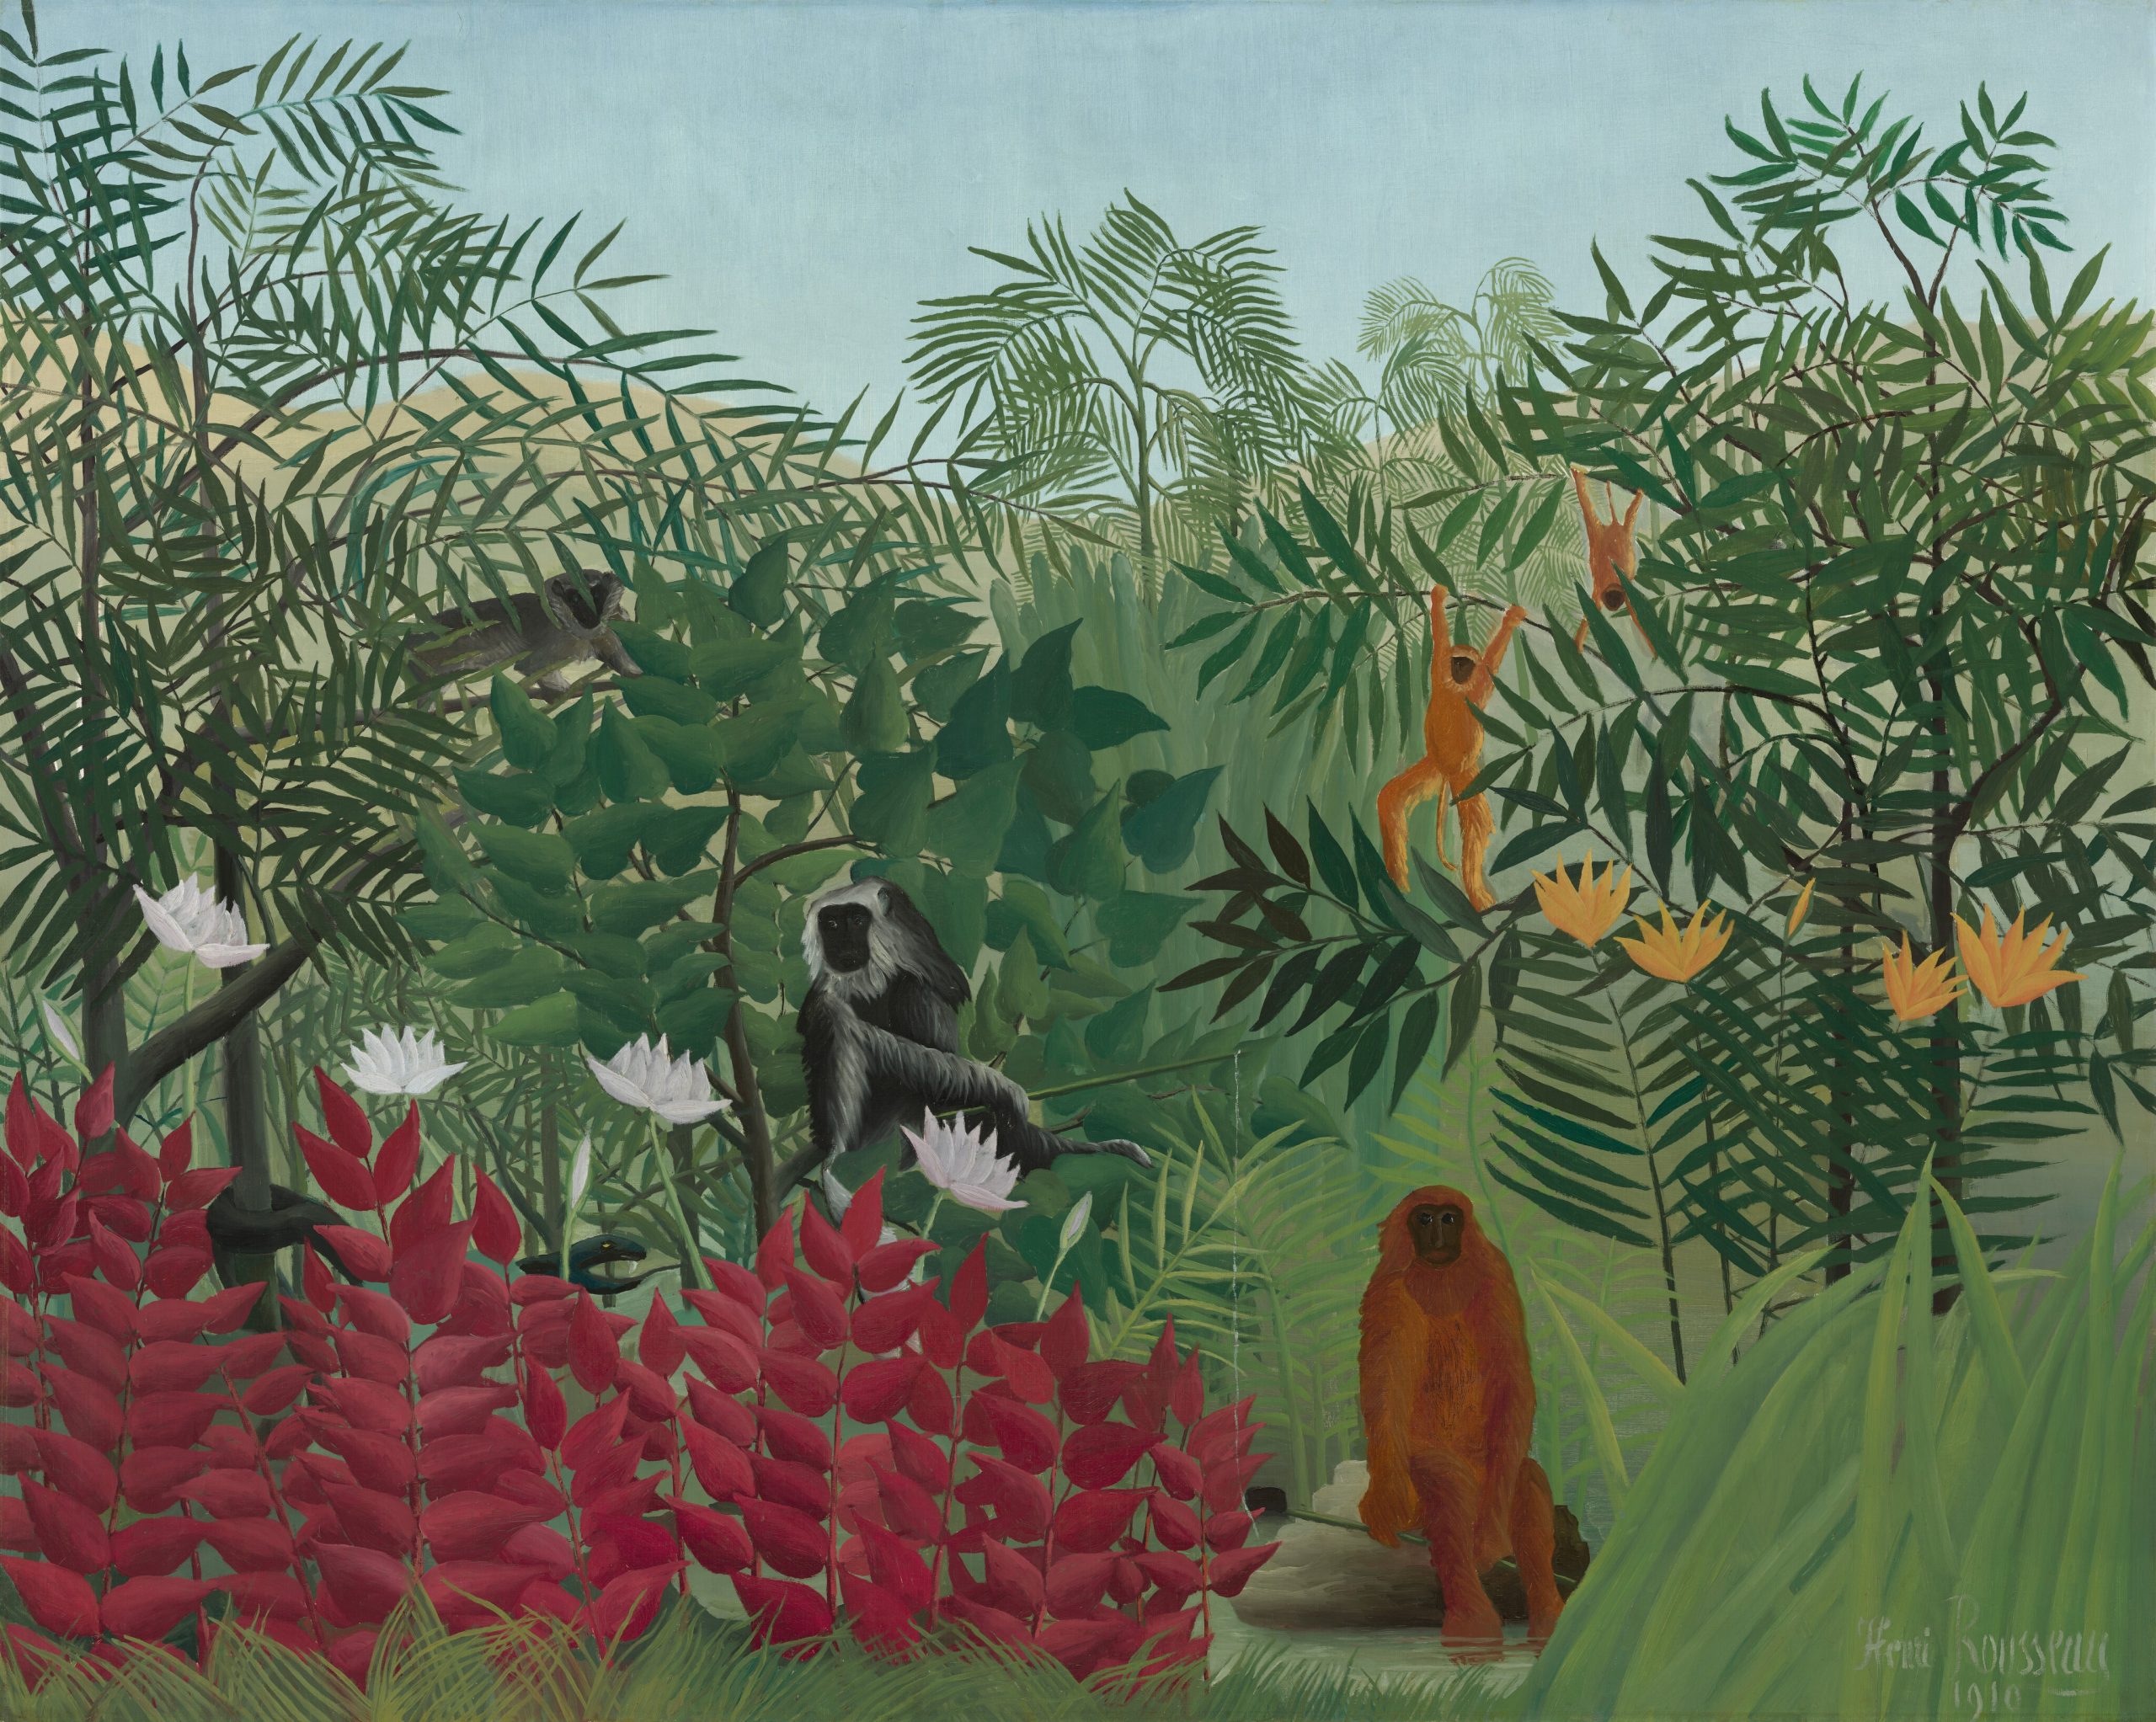 An abstract painting illustrates the image of monkeys playing in a colourful forest.